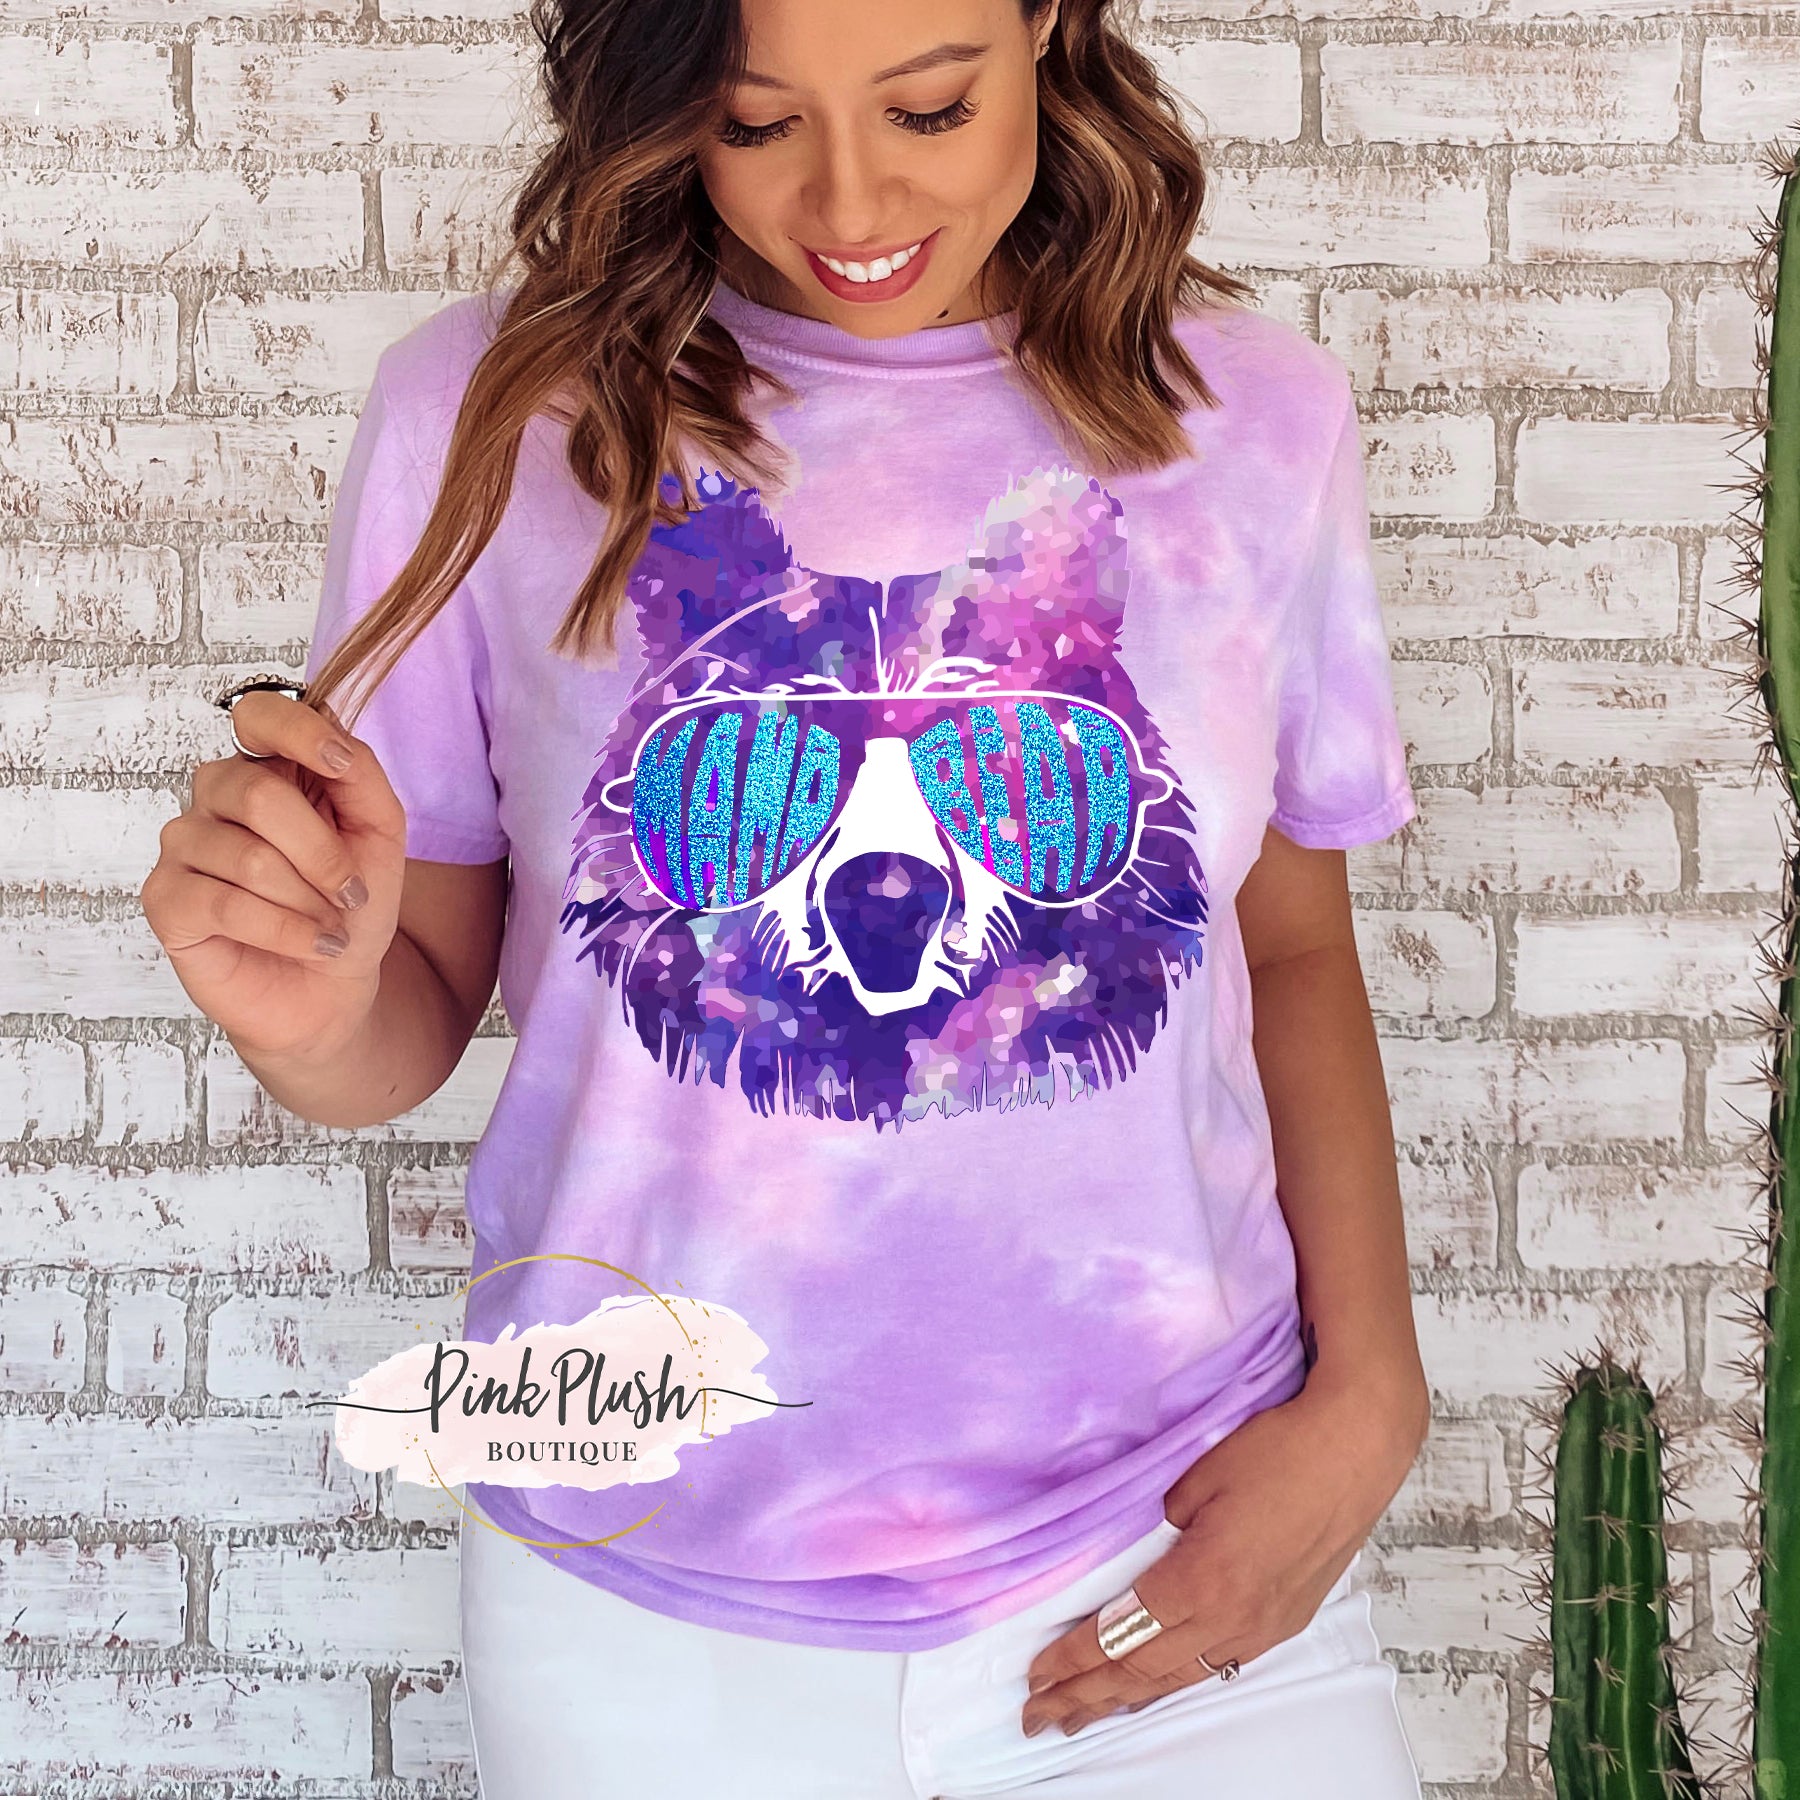 BEAR EMBROIDERY TIE-DYEING SHIRT